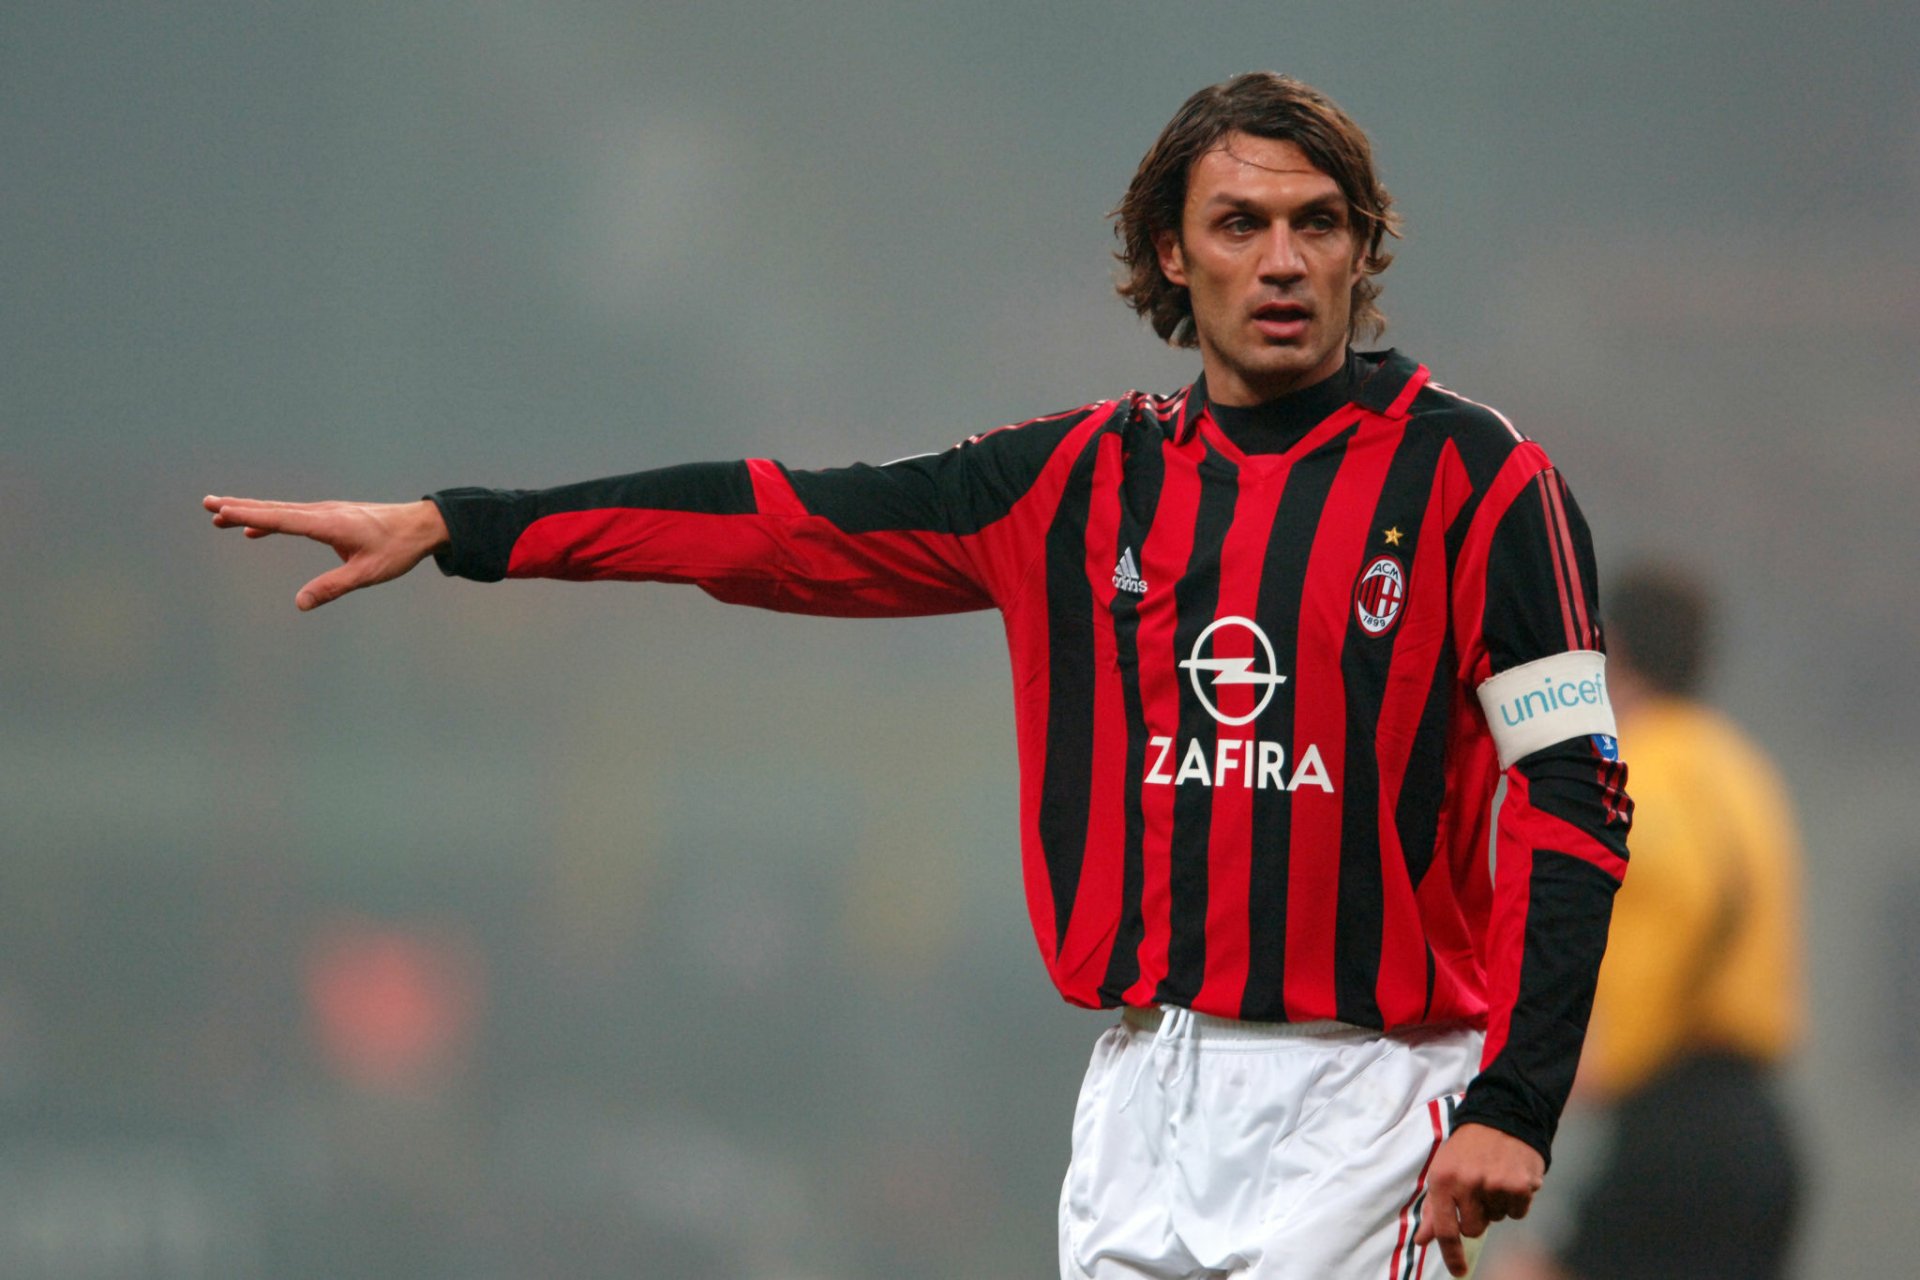 Paolo Maldini - The Best Full-Backs of All Time in Football History